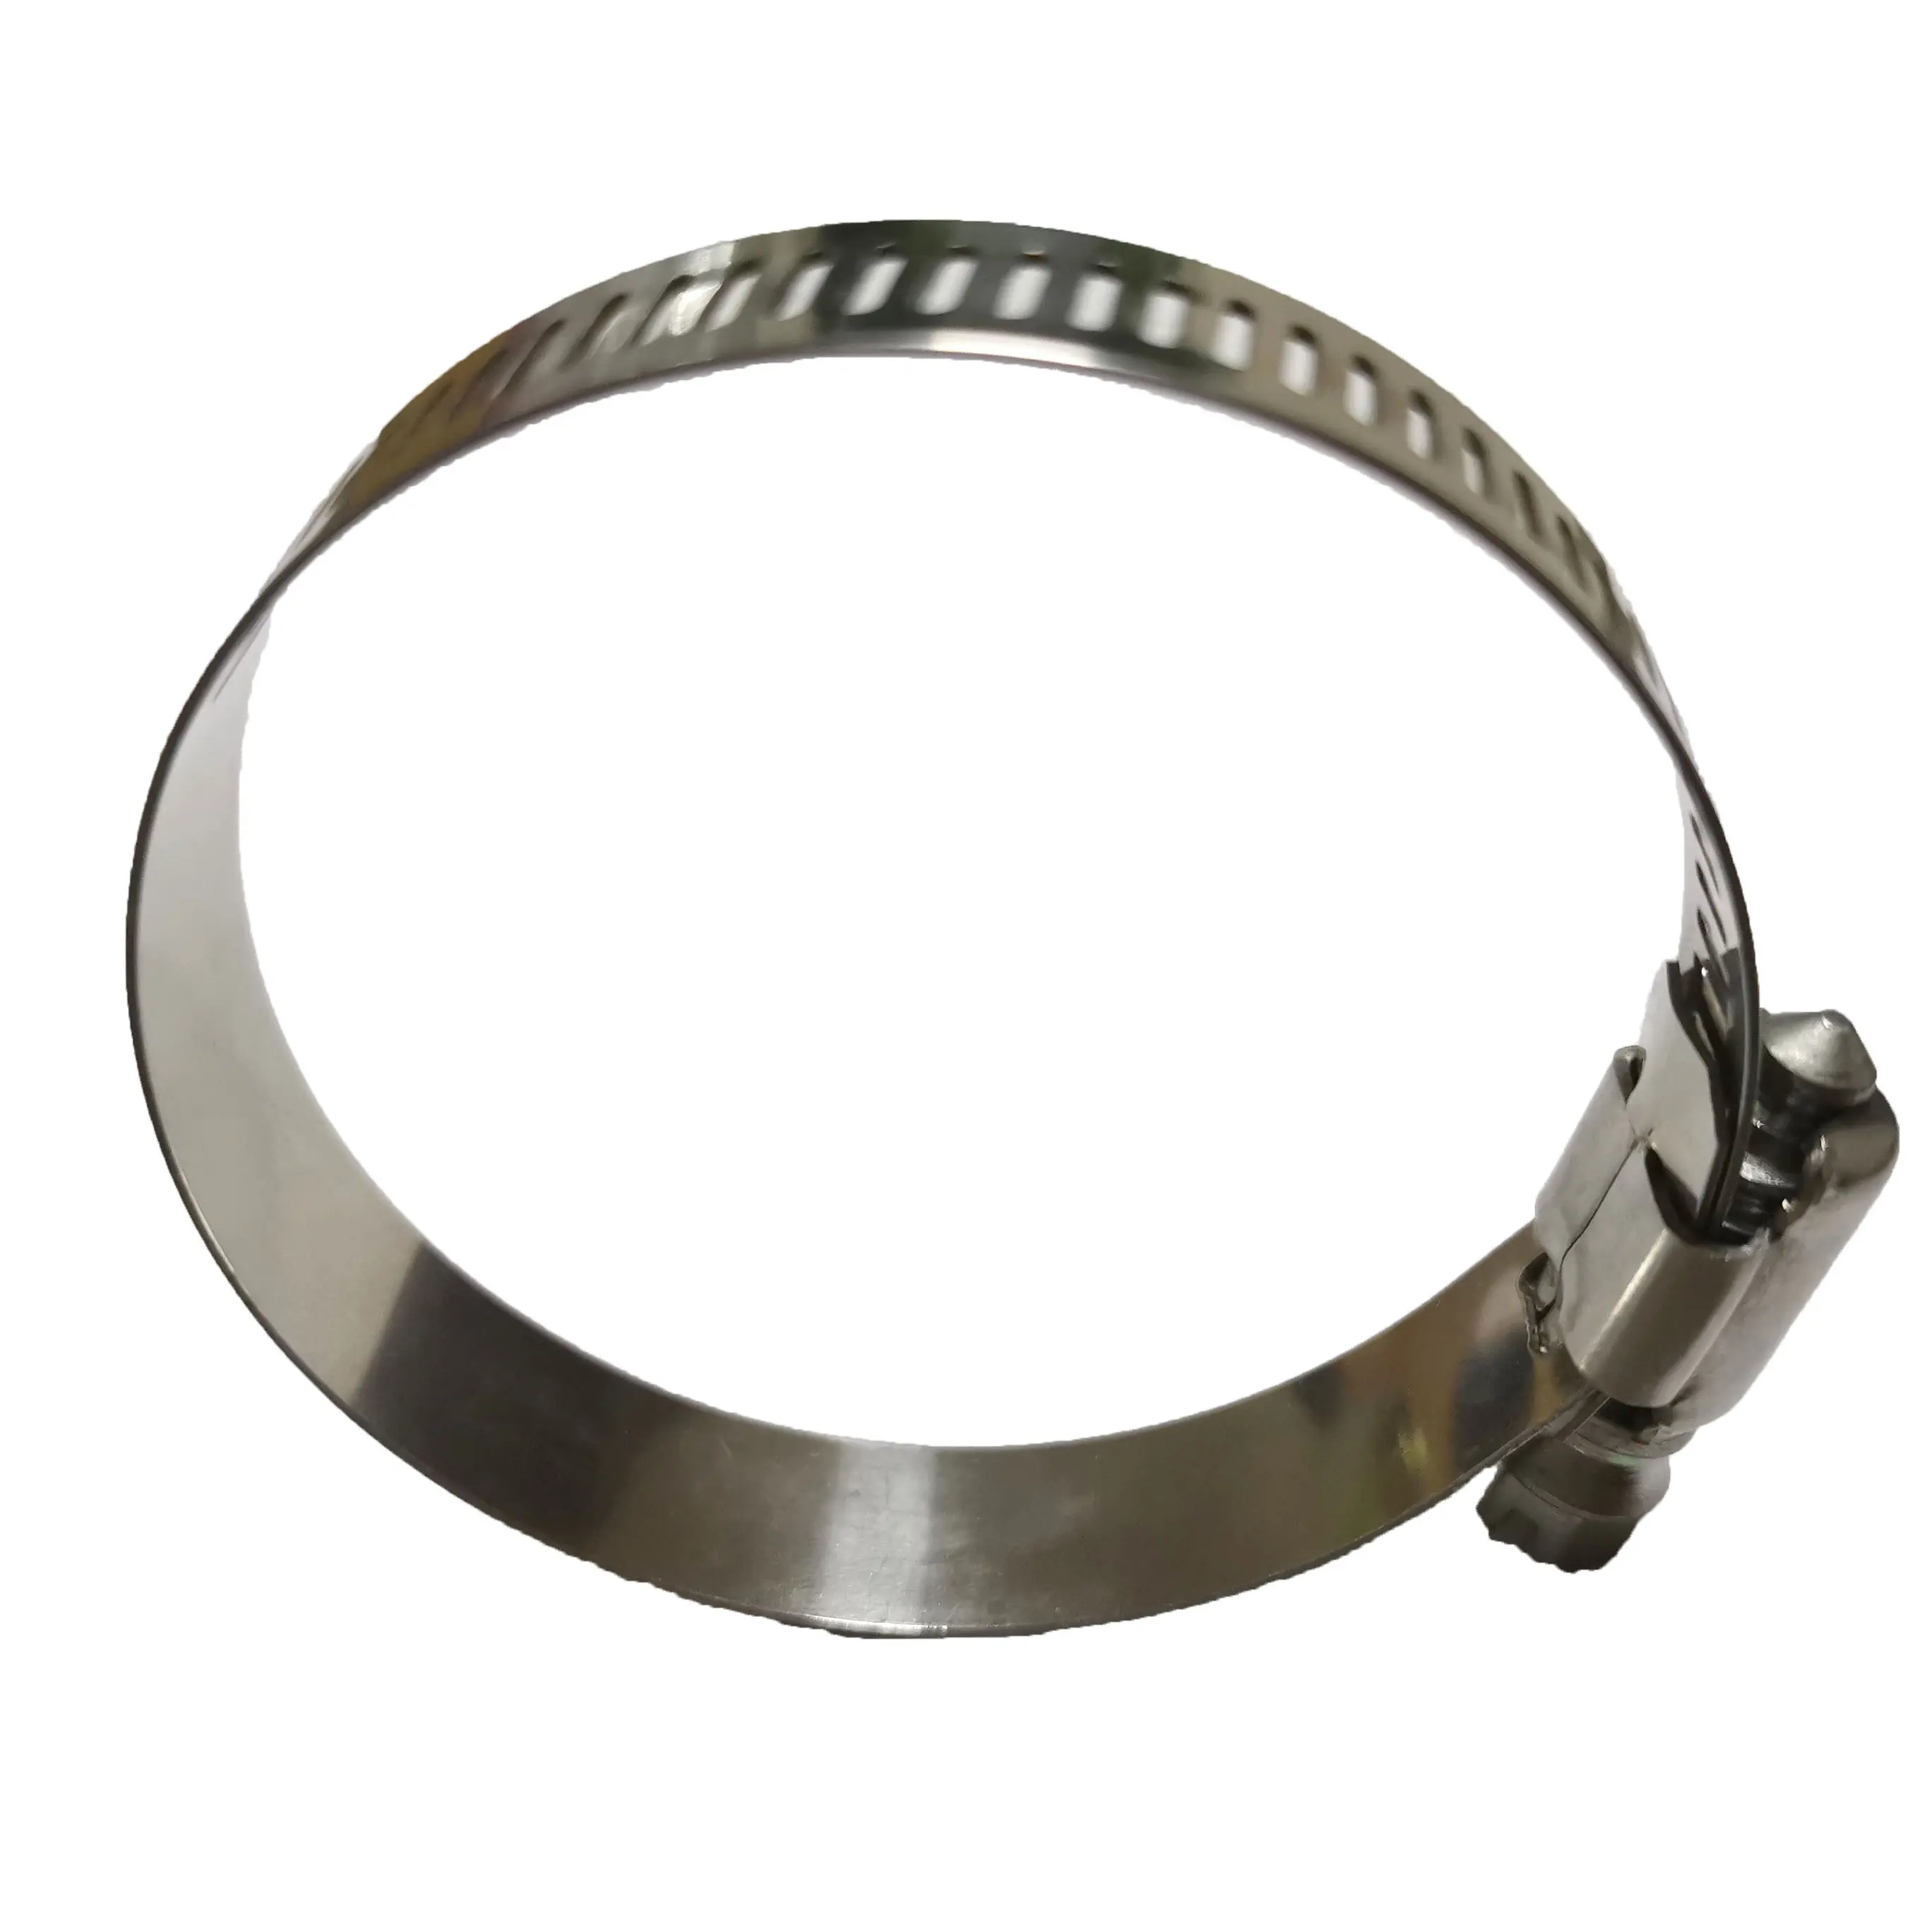 Stainless steel hose clamps perforated american hose clamp type of automotive hose clamps